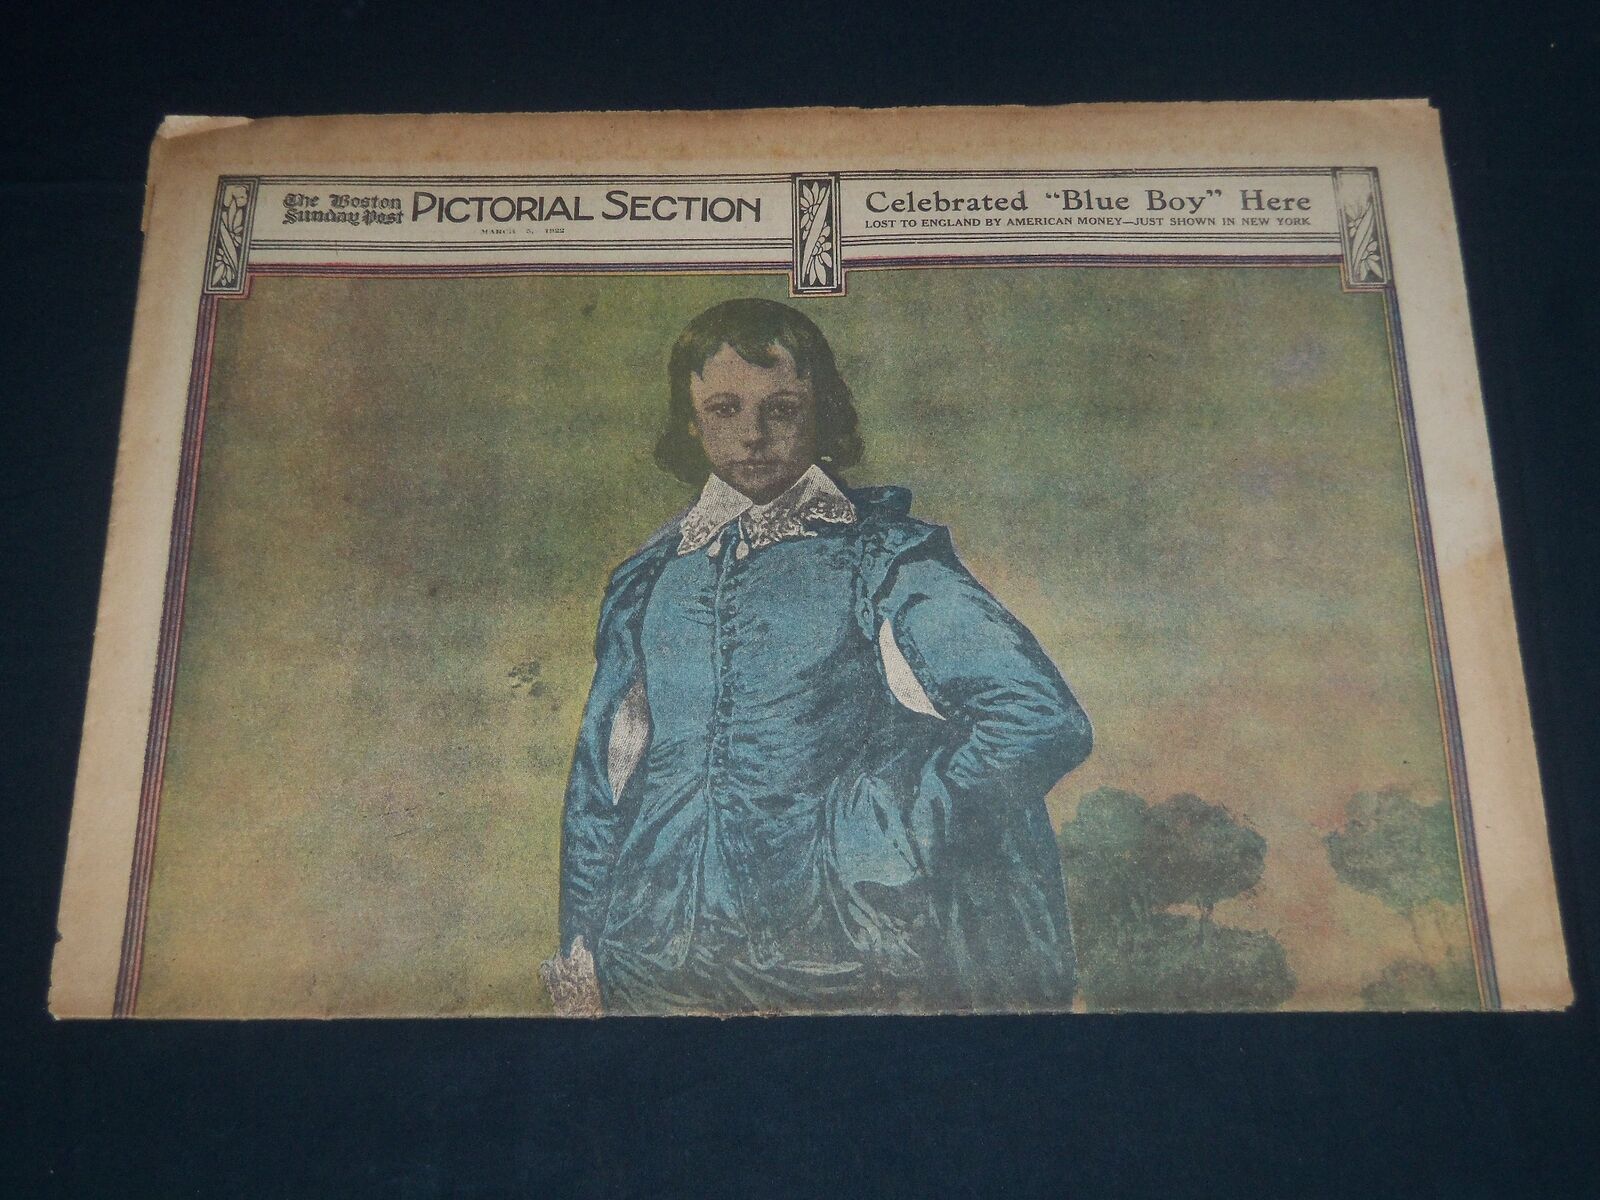 1922 MARCH 5 BOSTON SUNDAY POST PICTORIAL - BLUE BOY - PRINCE OF WALES - NP 3882